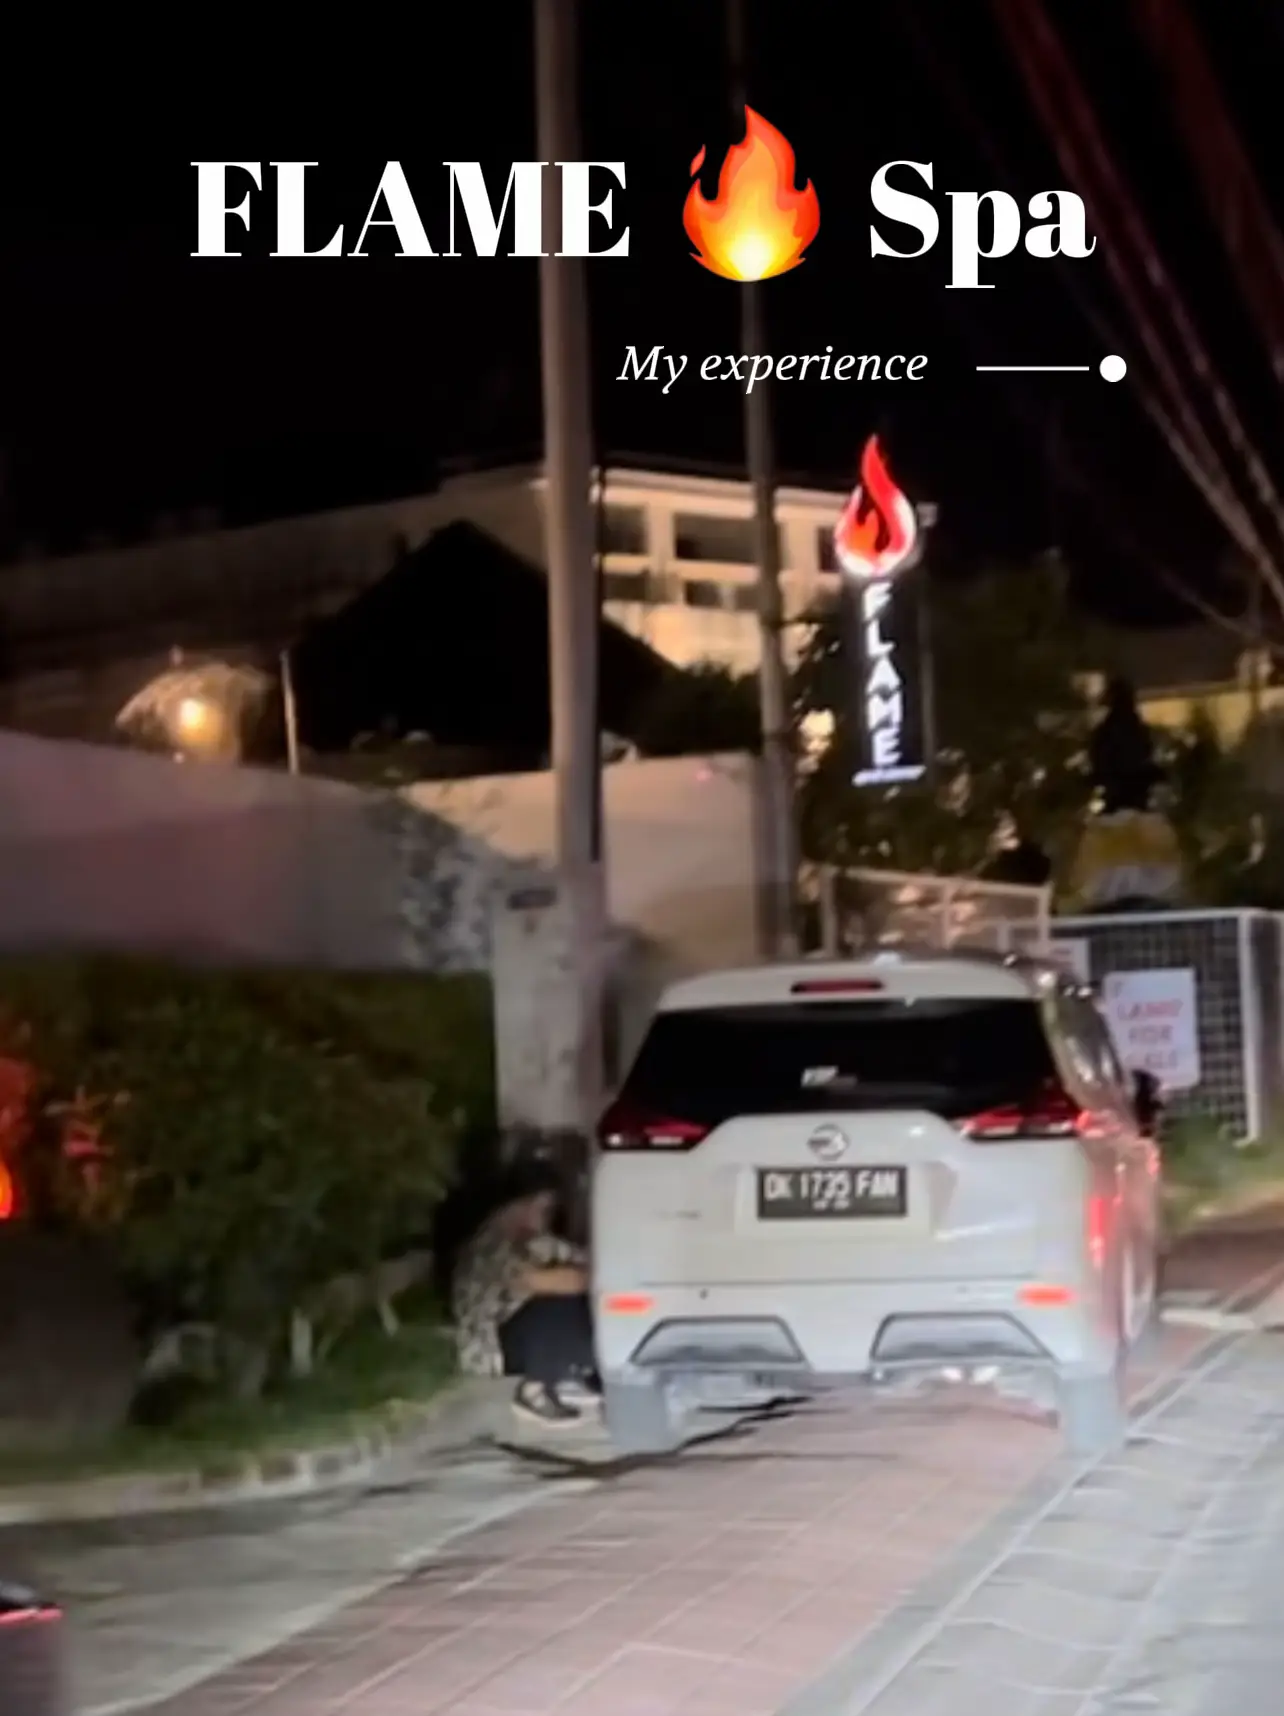 my experience at FLAME 🔥 Spa Bali 's images(0)